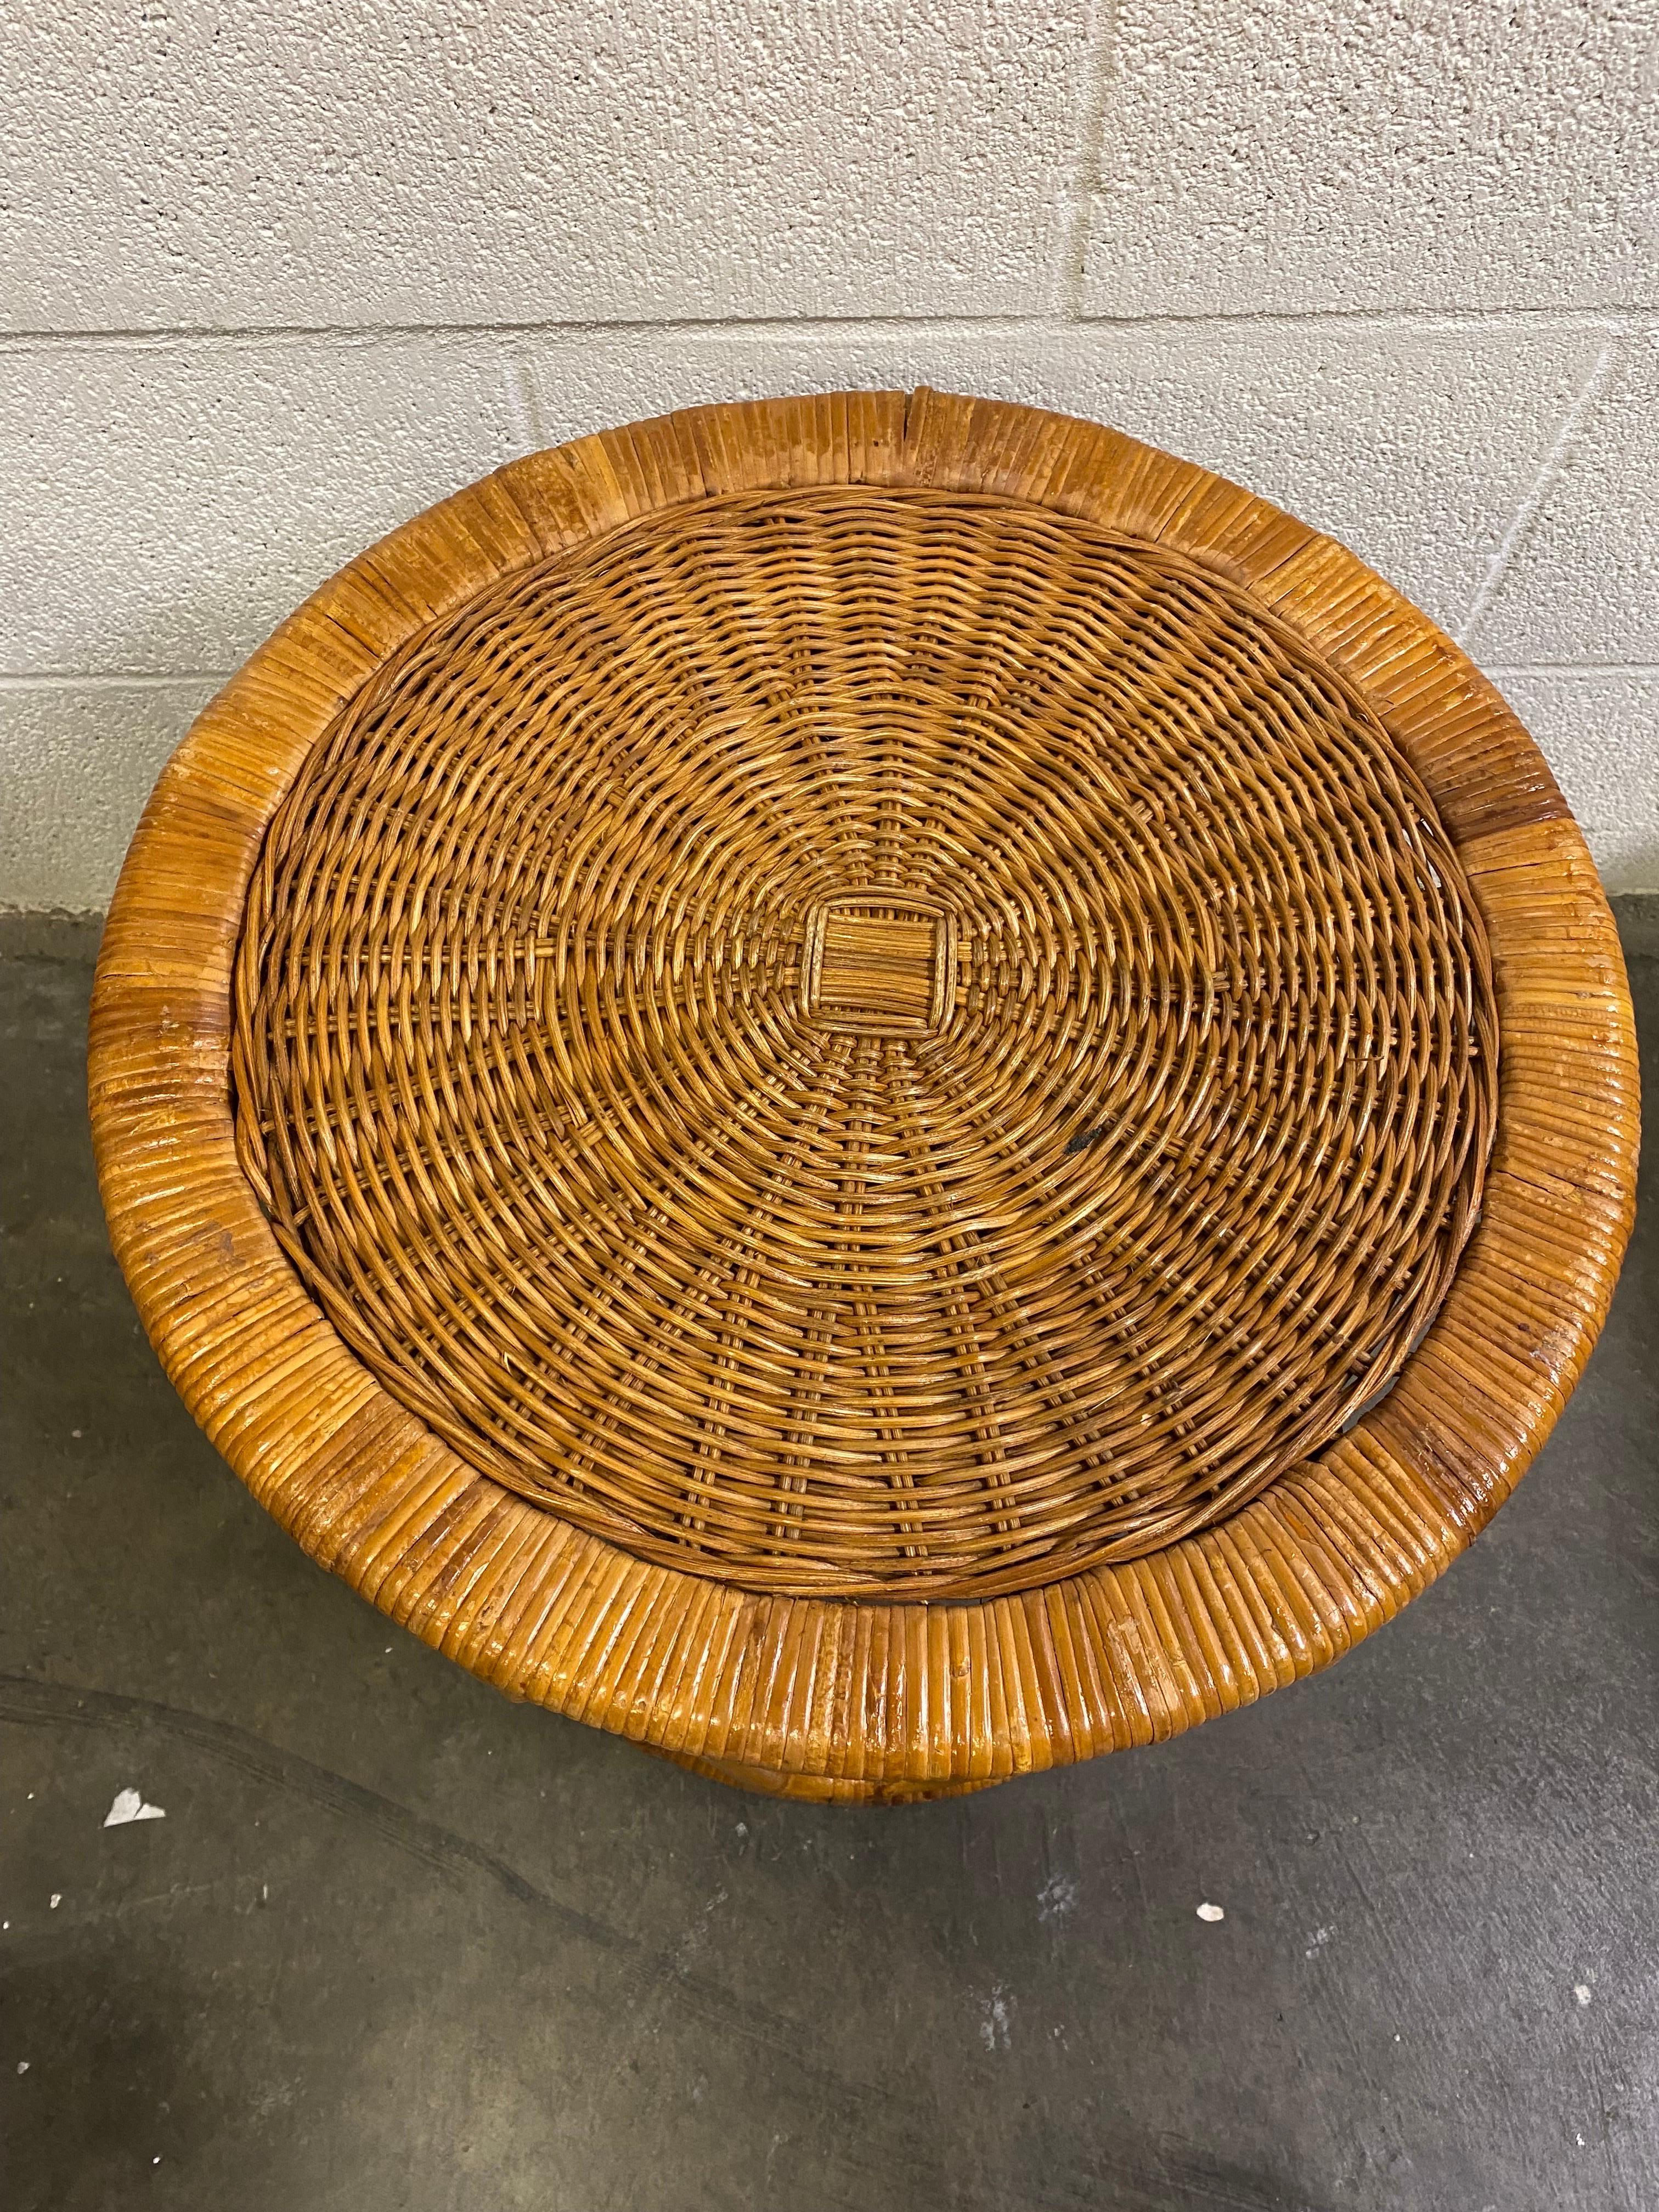 American 1960s Mid-Century Modern Rattan and Bamboo Stool